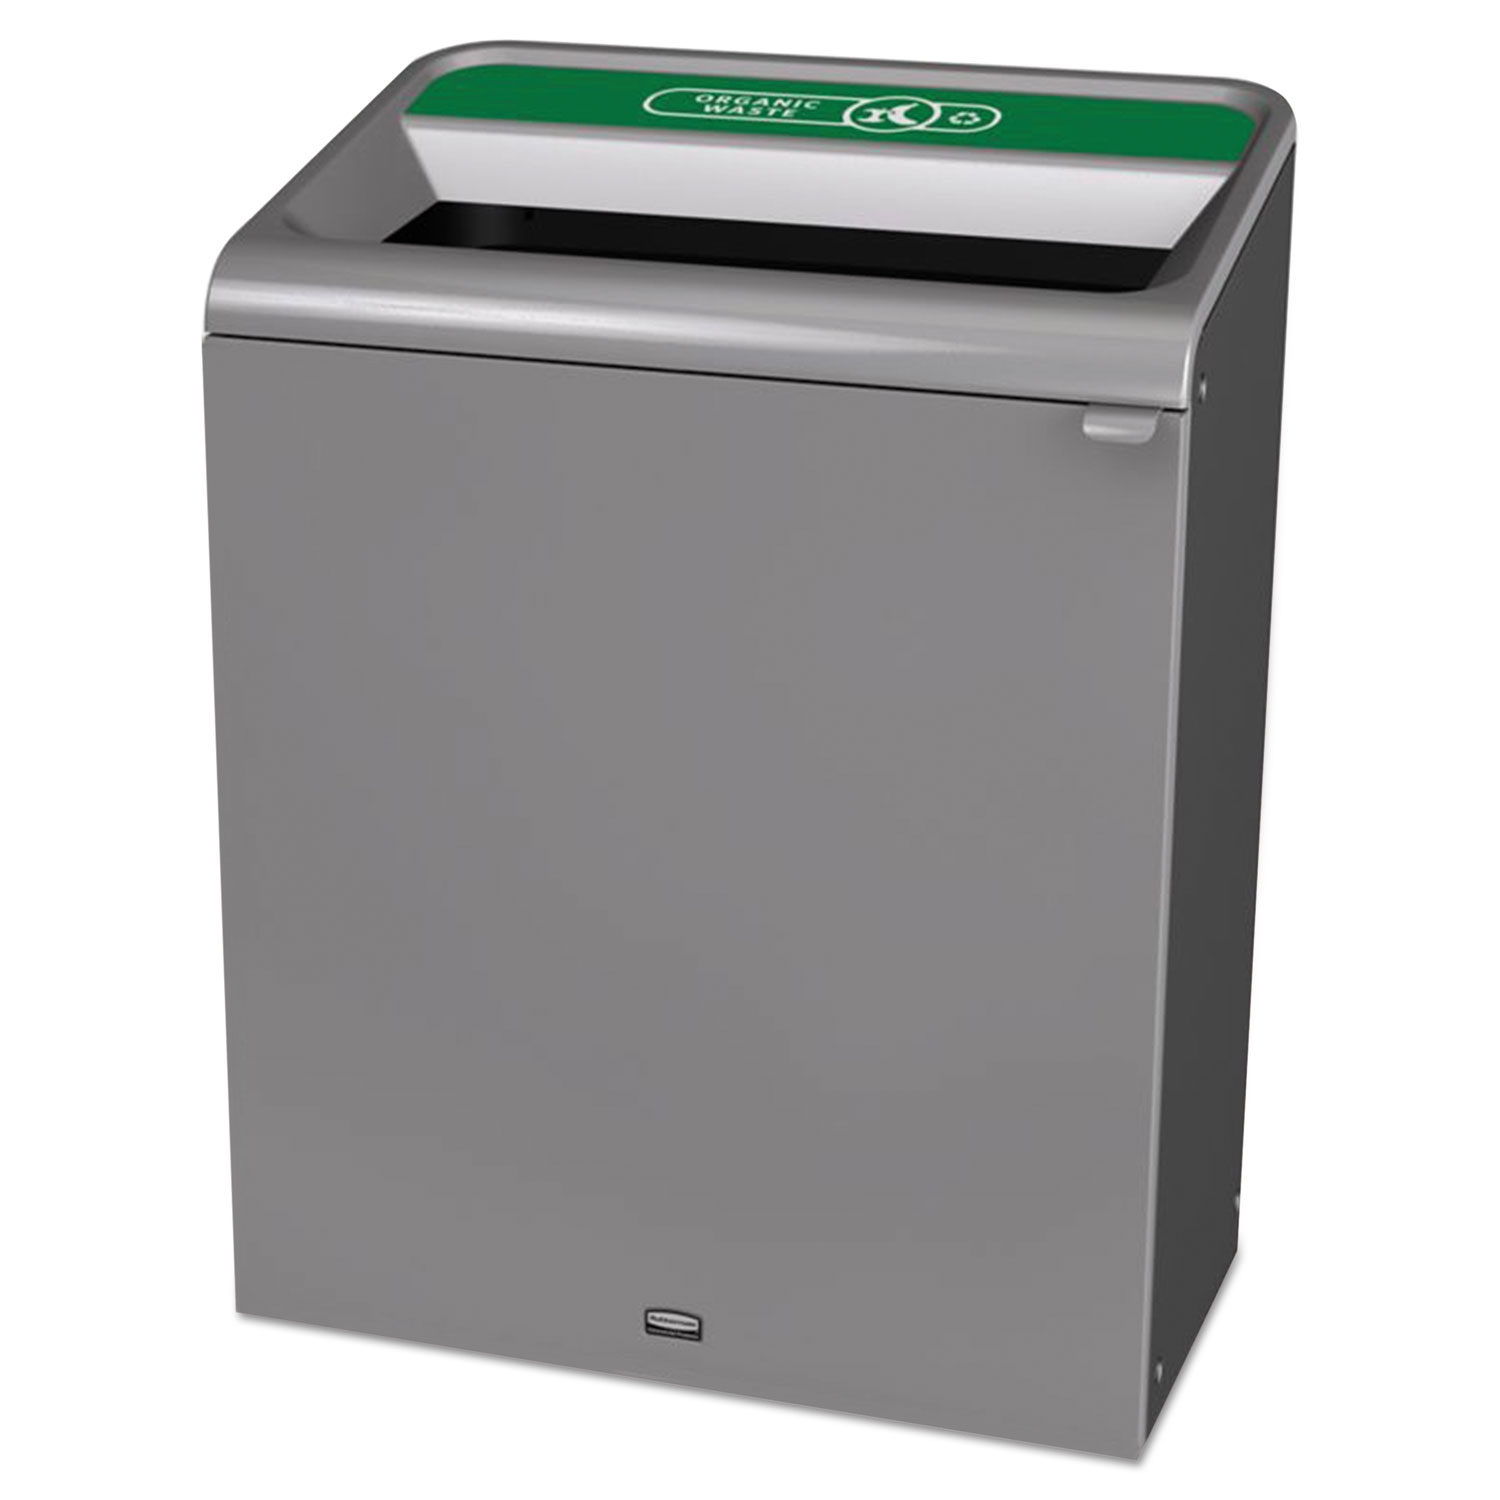 Configure Indoor Recycling Waste Receptacle, 45 gal, Gray, Organic Waste